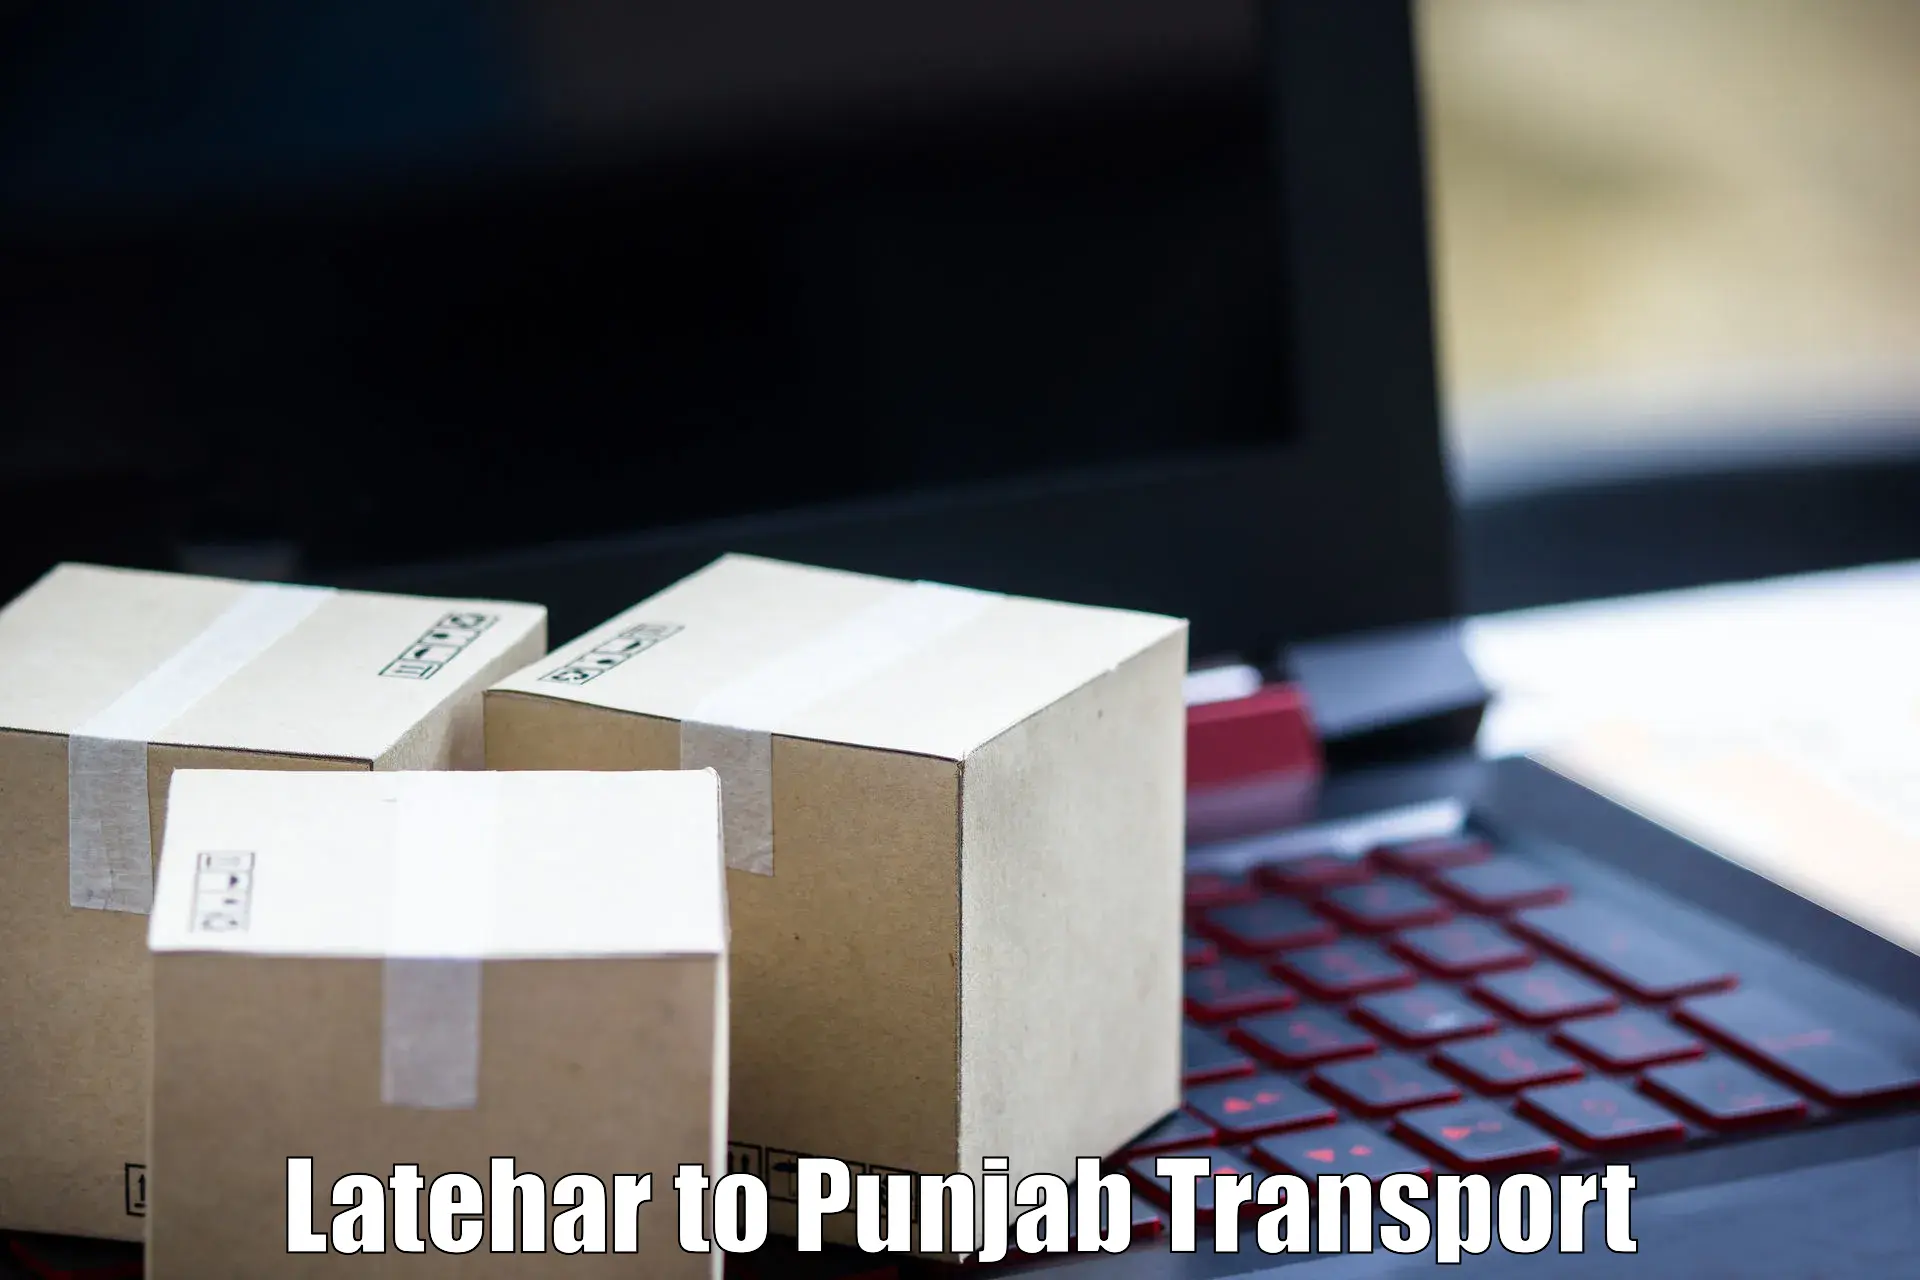 Container transport service Latehar to Thapar Institute of Engineering and Technology Patiala